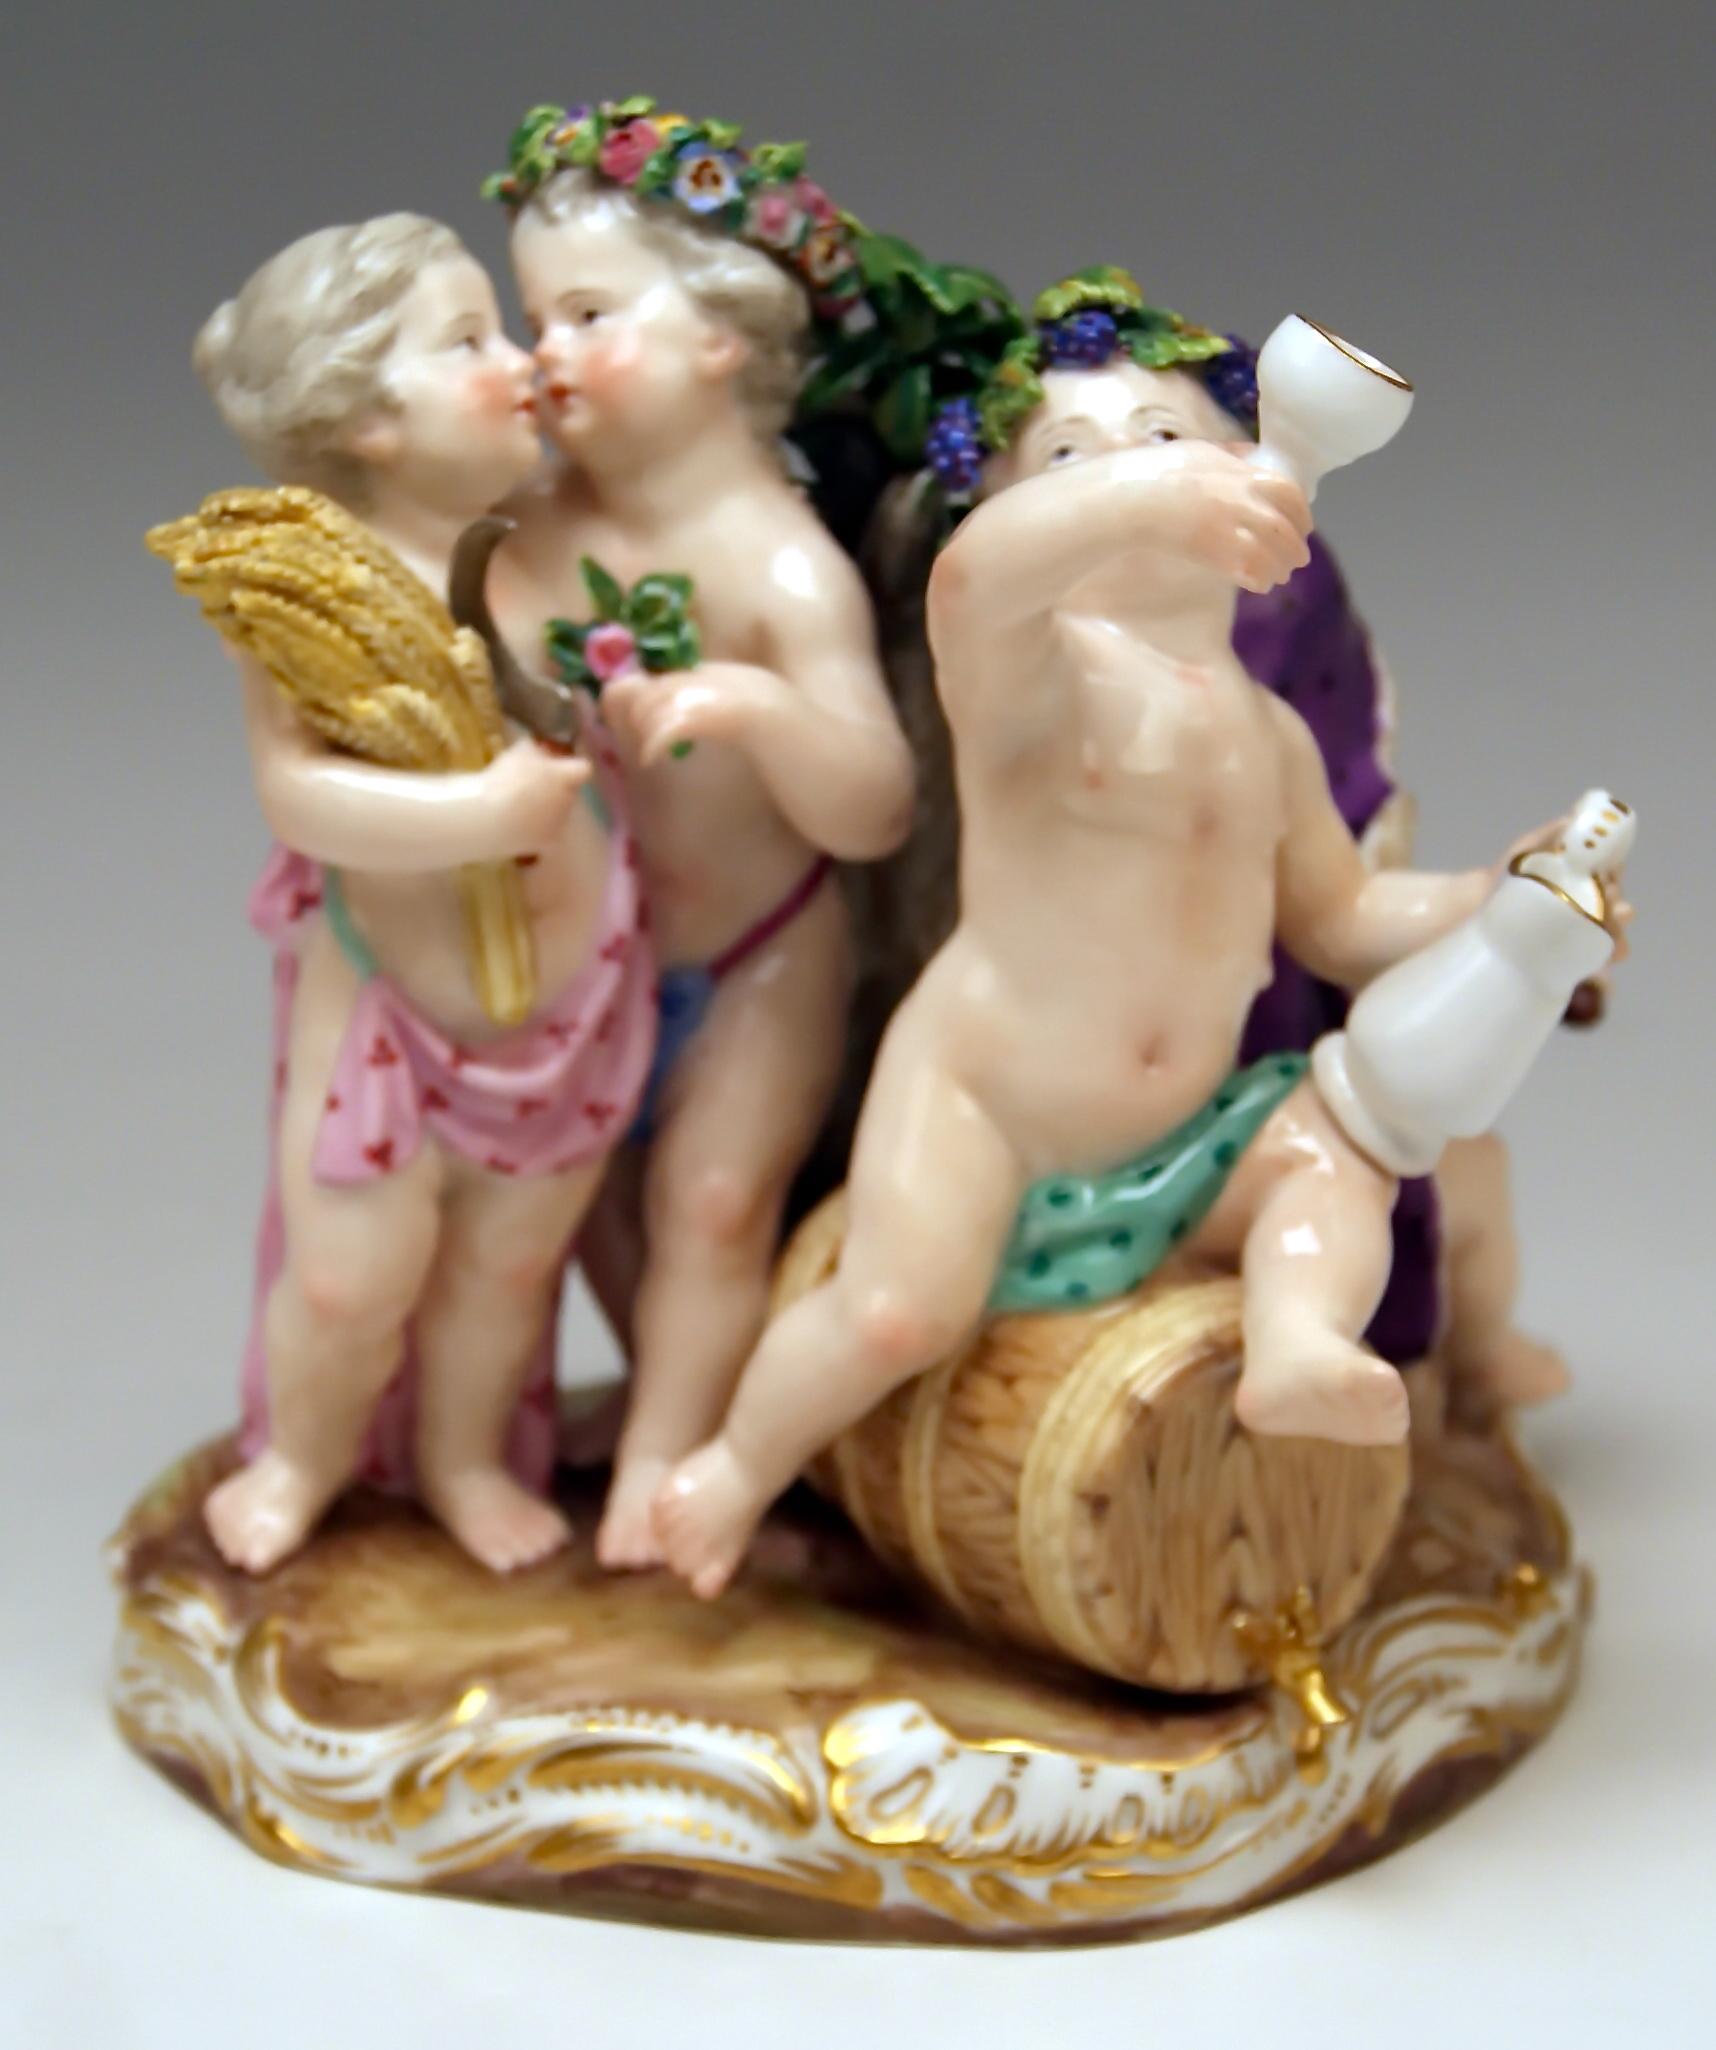 Meissen Gorgeous Cherubs (= Seasons' Figurines): Spring, Summer, Autumn (Fall) And Winter.
The Details Are Stunningly Scupltured = Finest Modelling

Manufactory: Meissen 
Dating: made circa 1870
Hallmarked: Meissen Mark with Pommels on Hilts